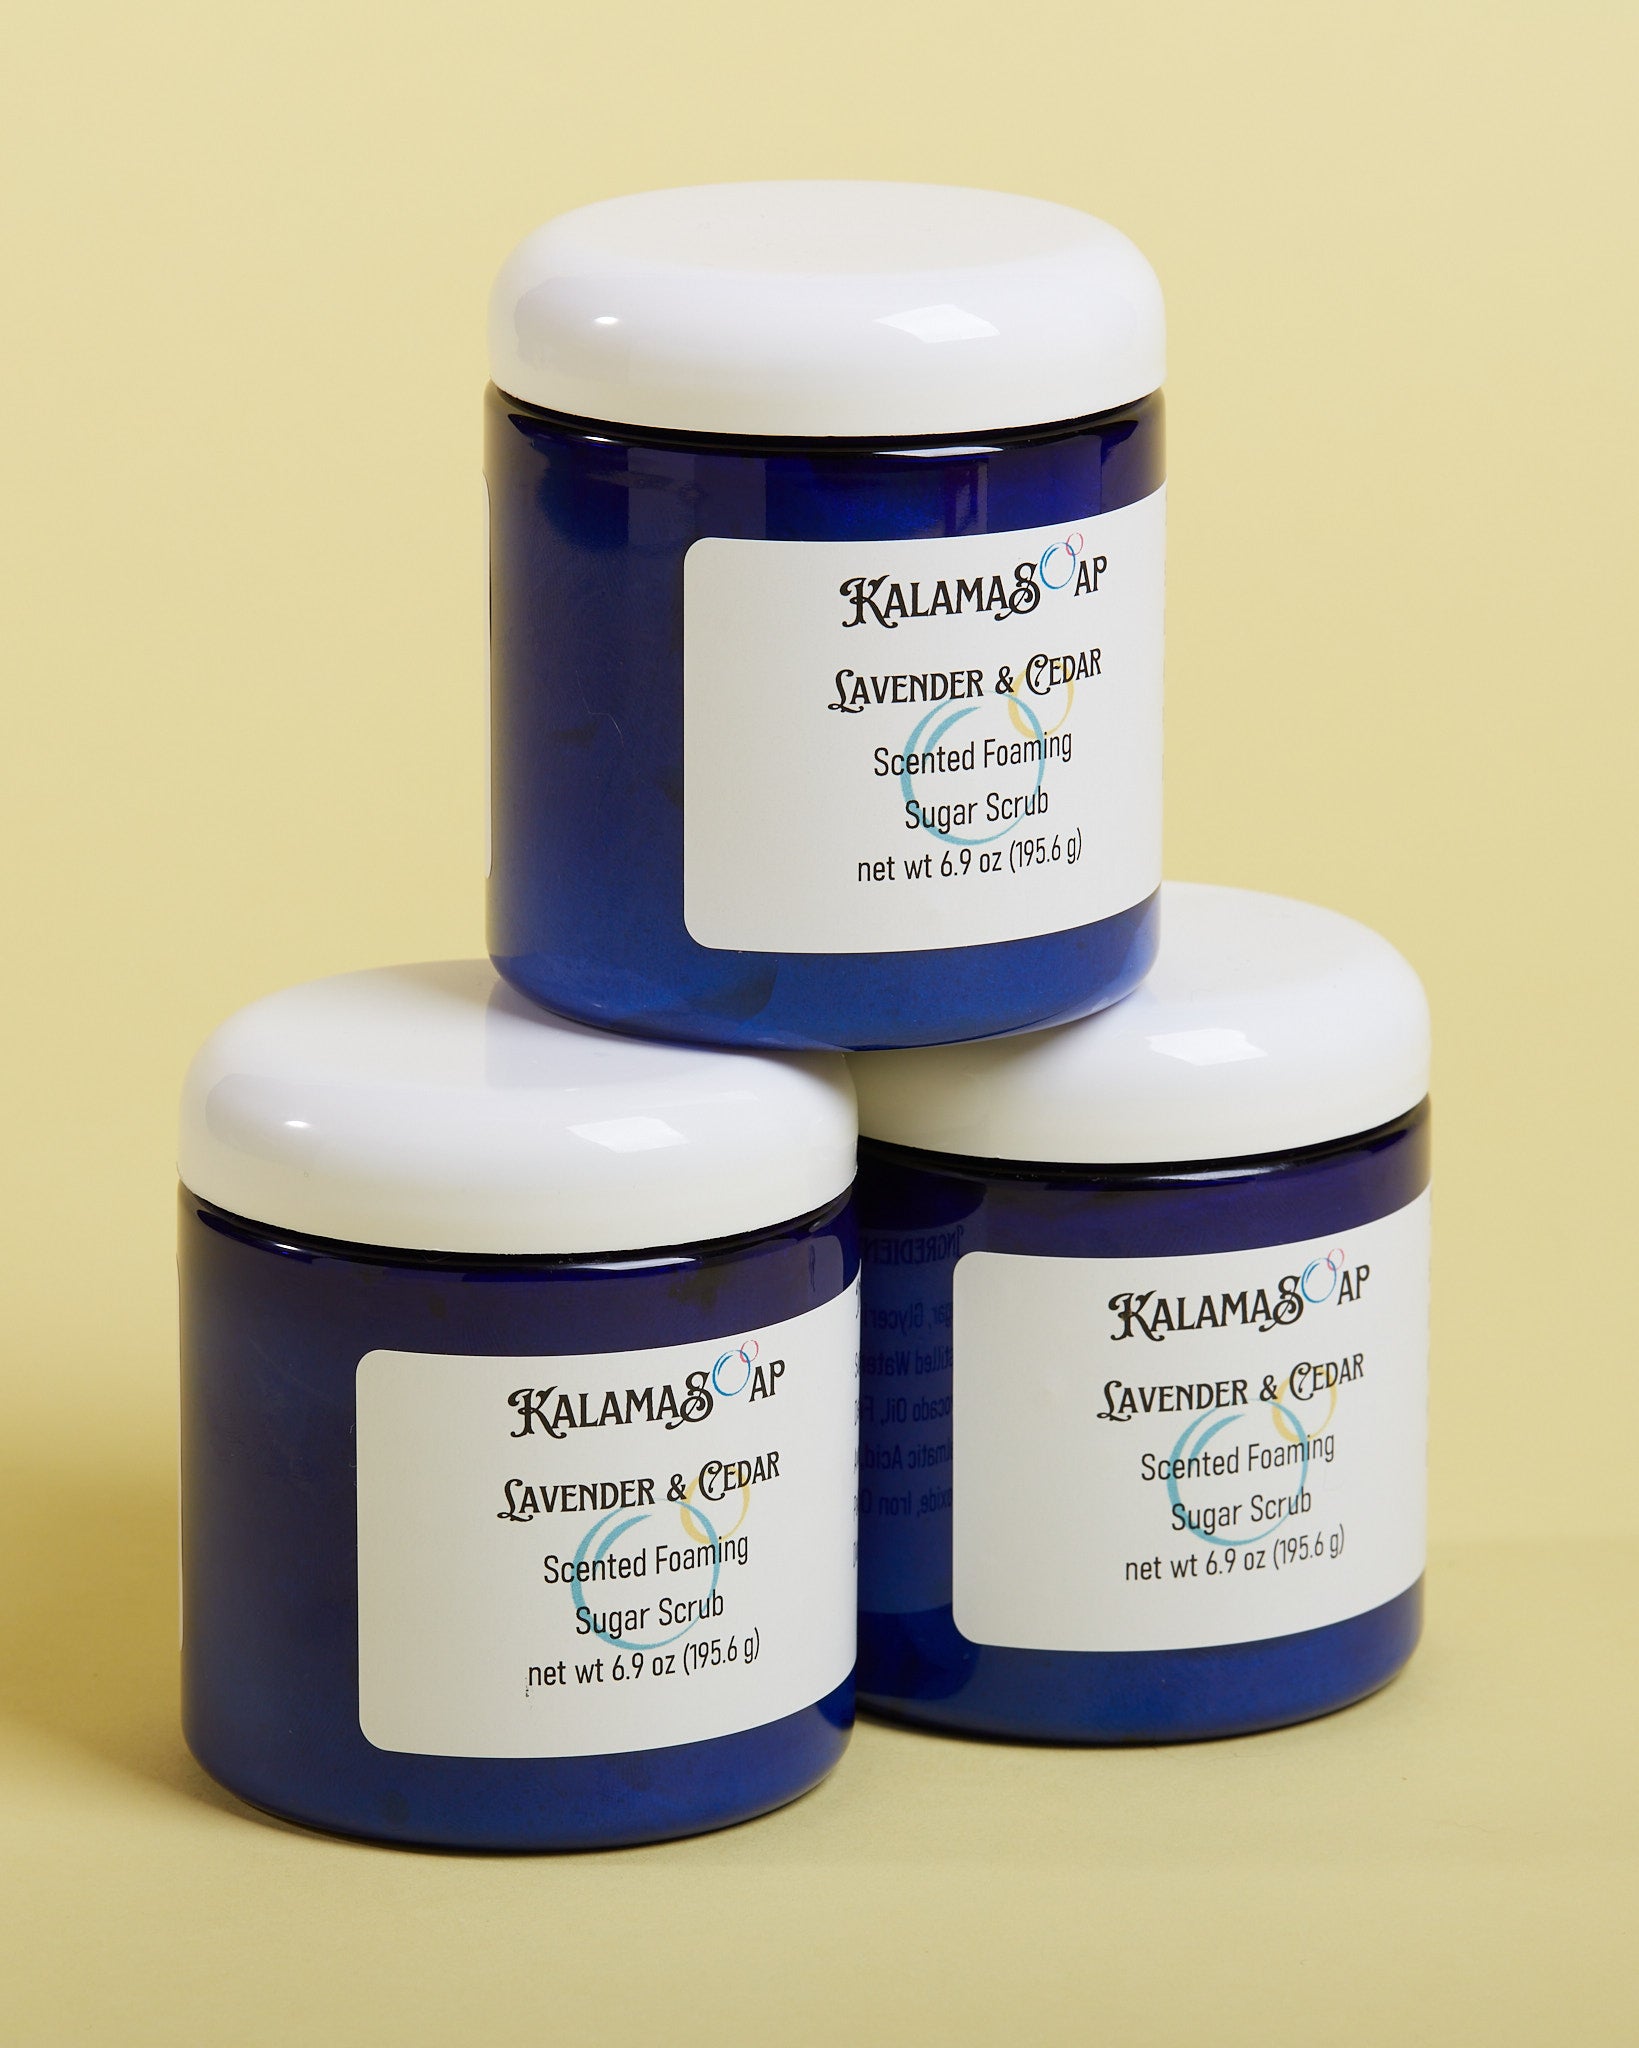 A photo of 3, 6.9 ounce blue plastic jars with white dome lids on a yellow background labelend KalamaSoap Lavender & Cedar Scented Foaming Sugar Scrub